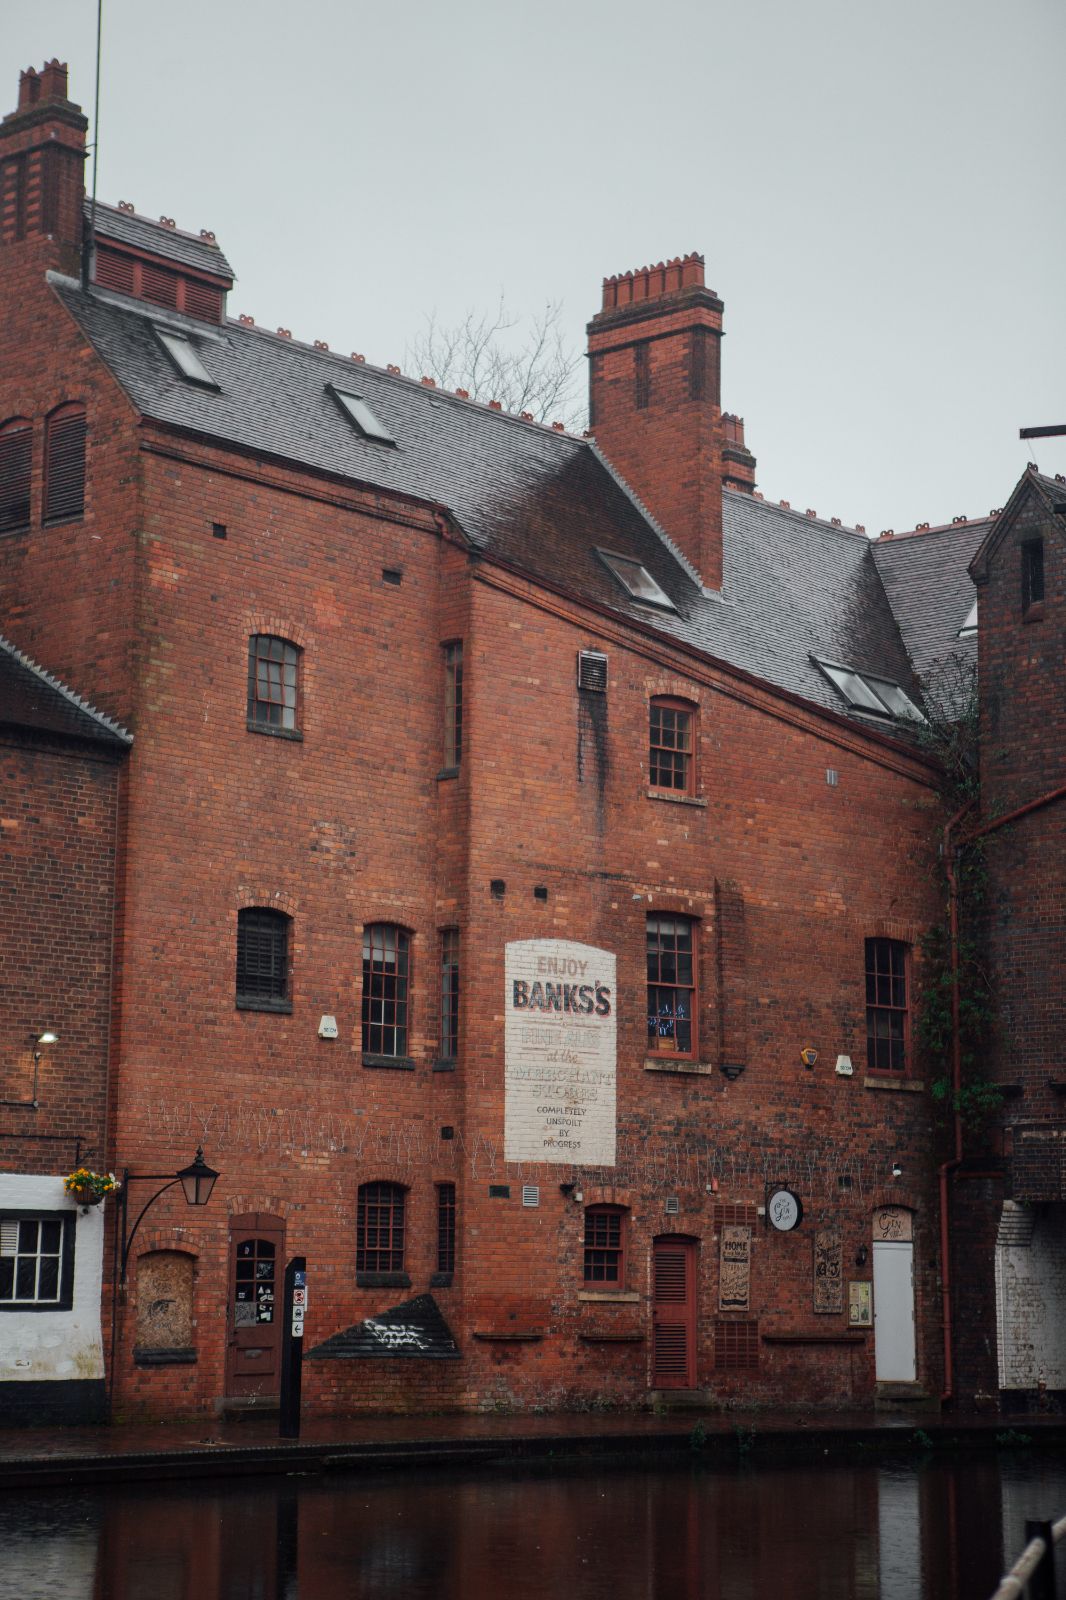 Tall Victorian red-brick building, with painted sign advertising ales, along a Birmingham canal on a rainy winter’s day.